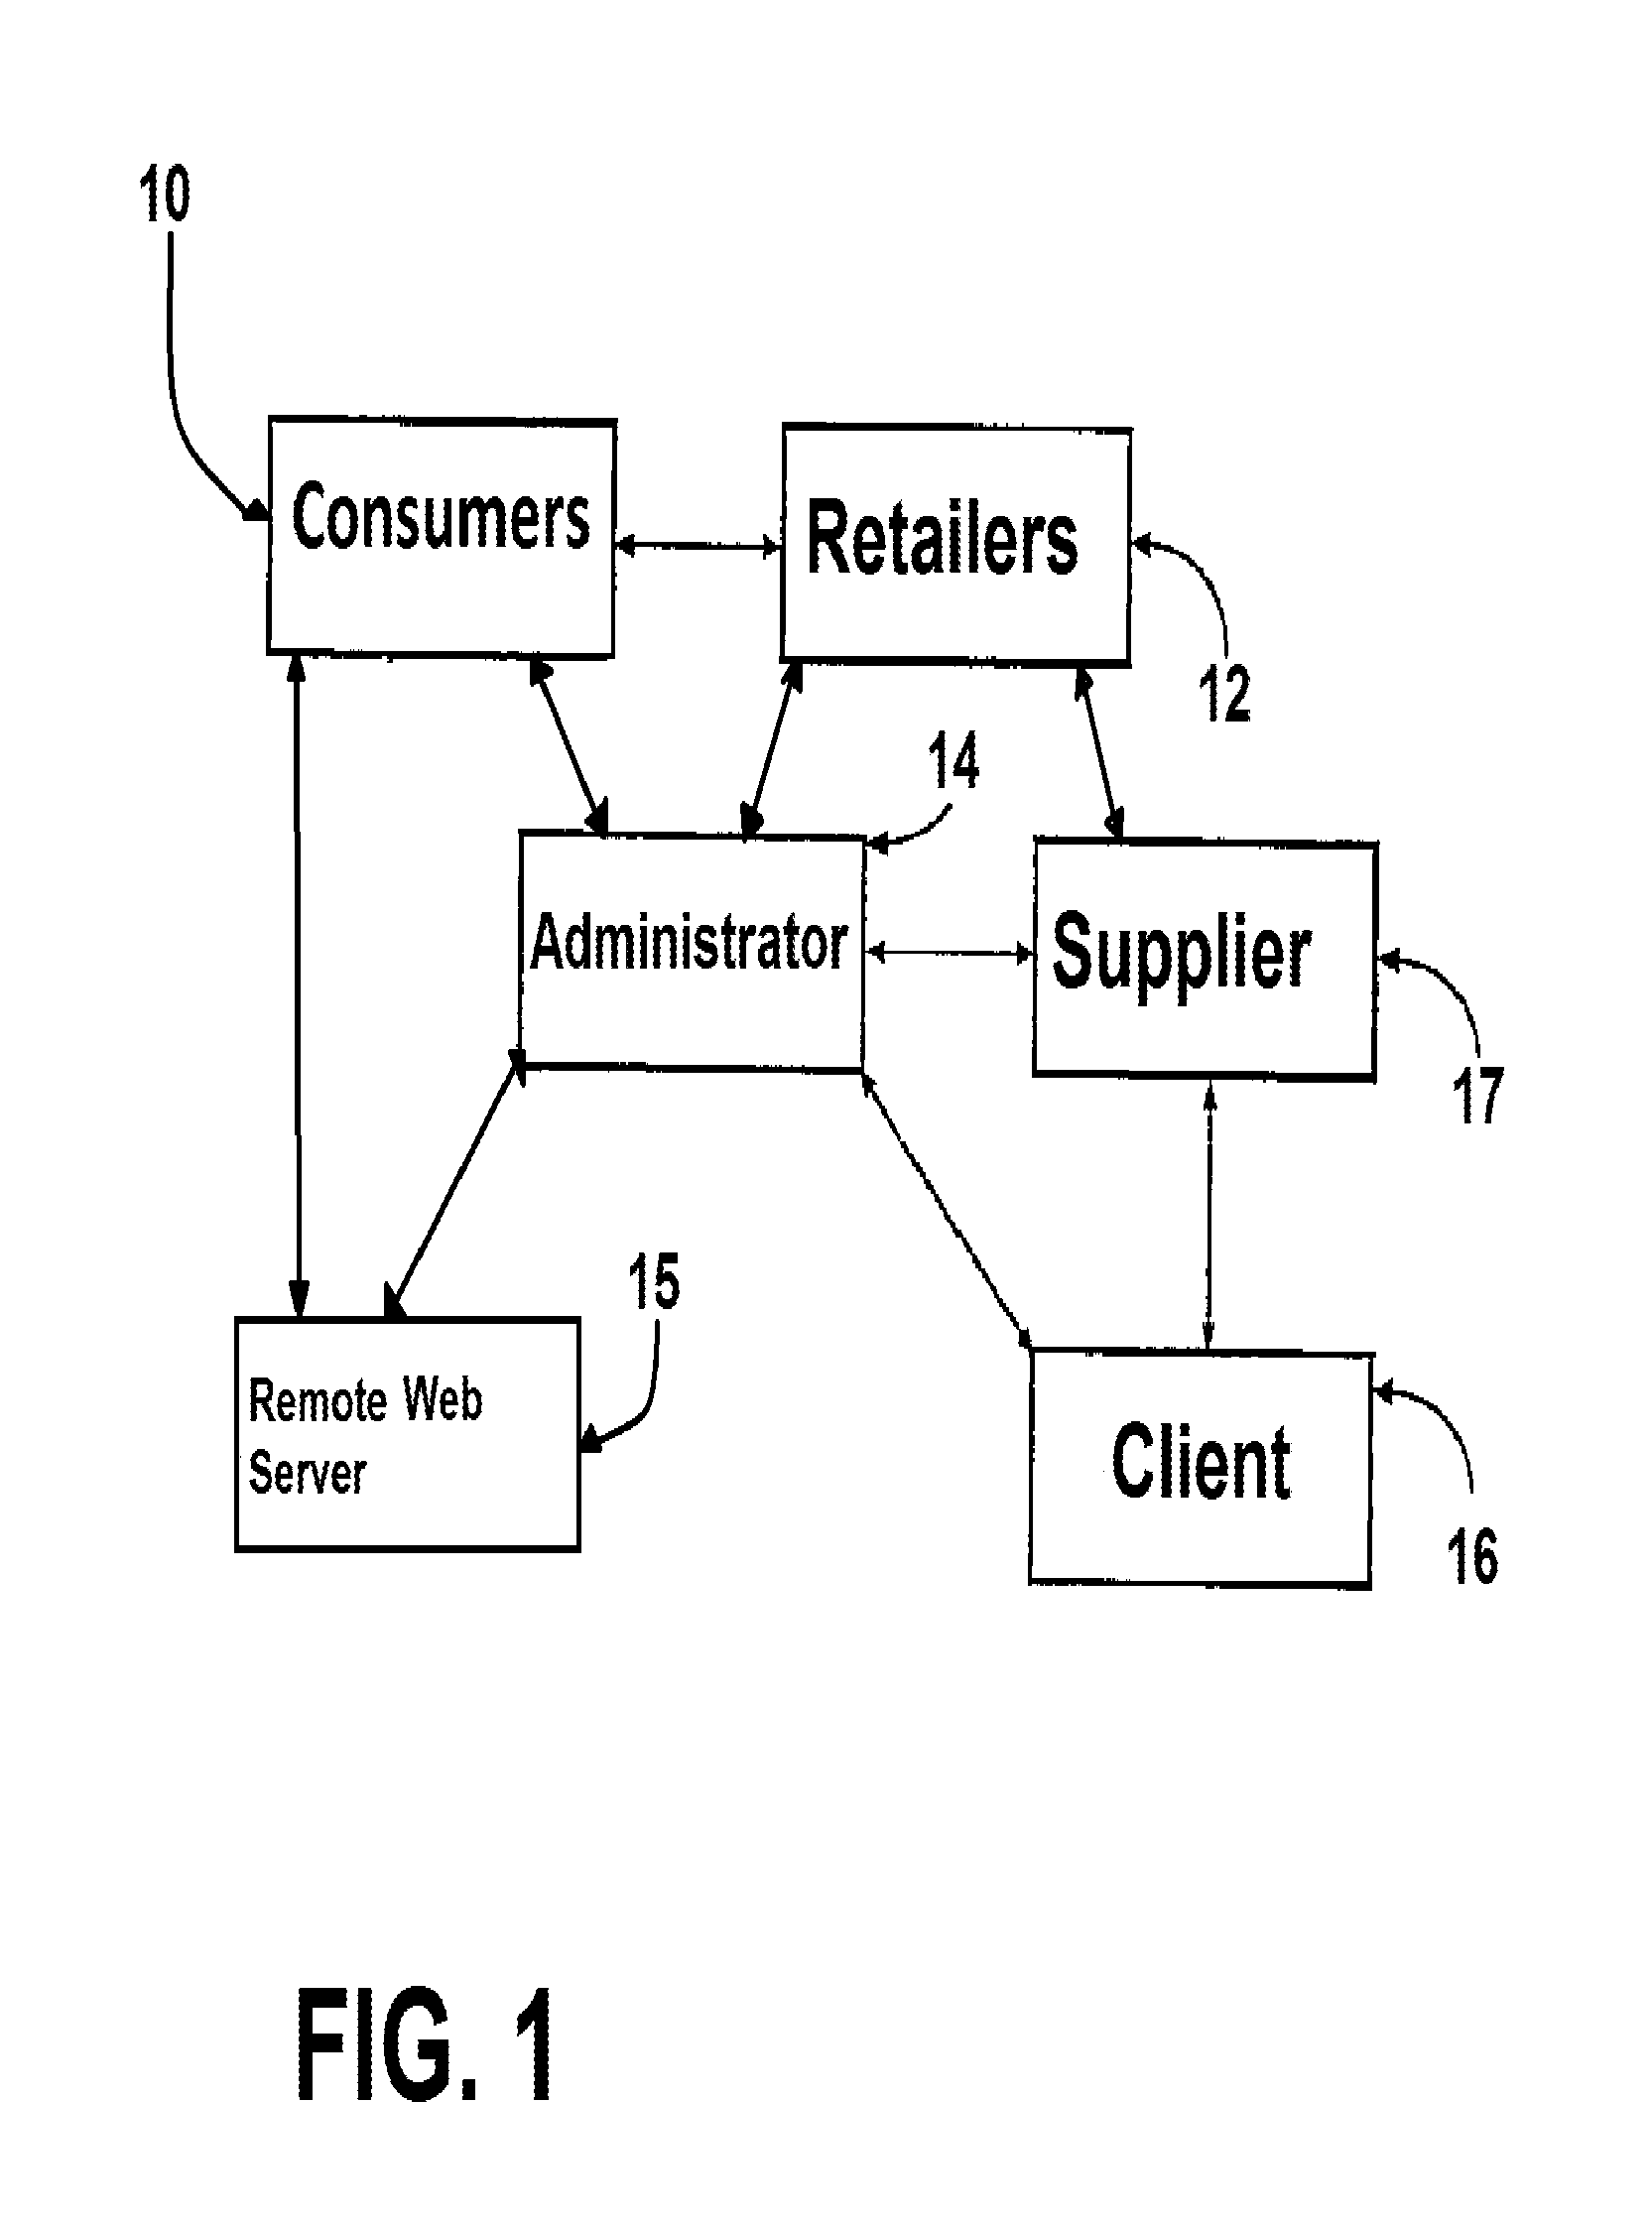 Method and system for providing discounts to consumers